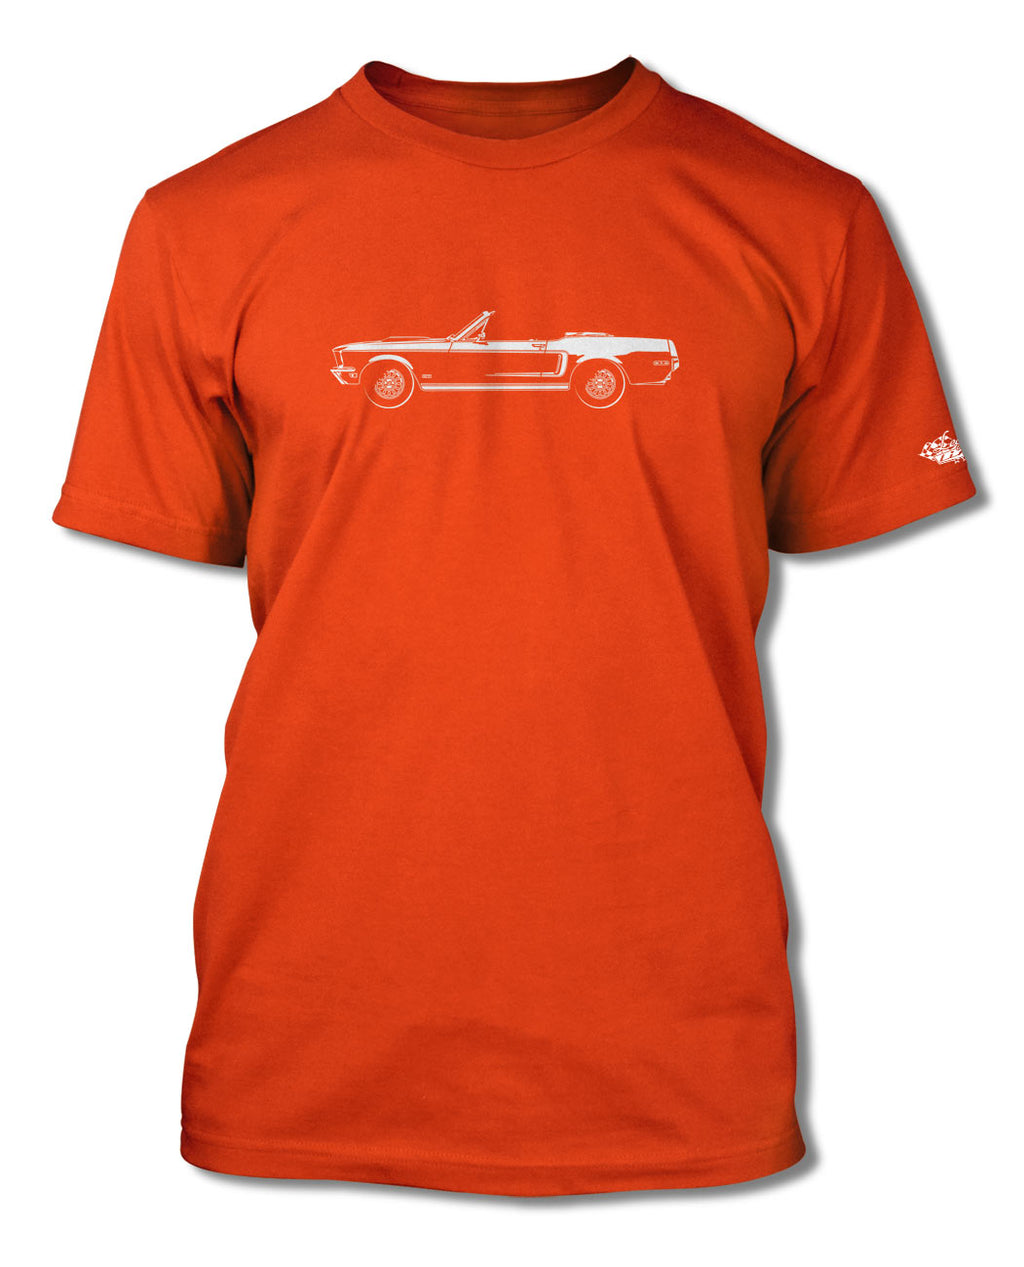 1968 Ford Mustang GT Convertible with Stripes T-Shirt - Men - Side View